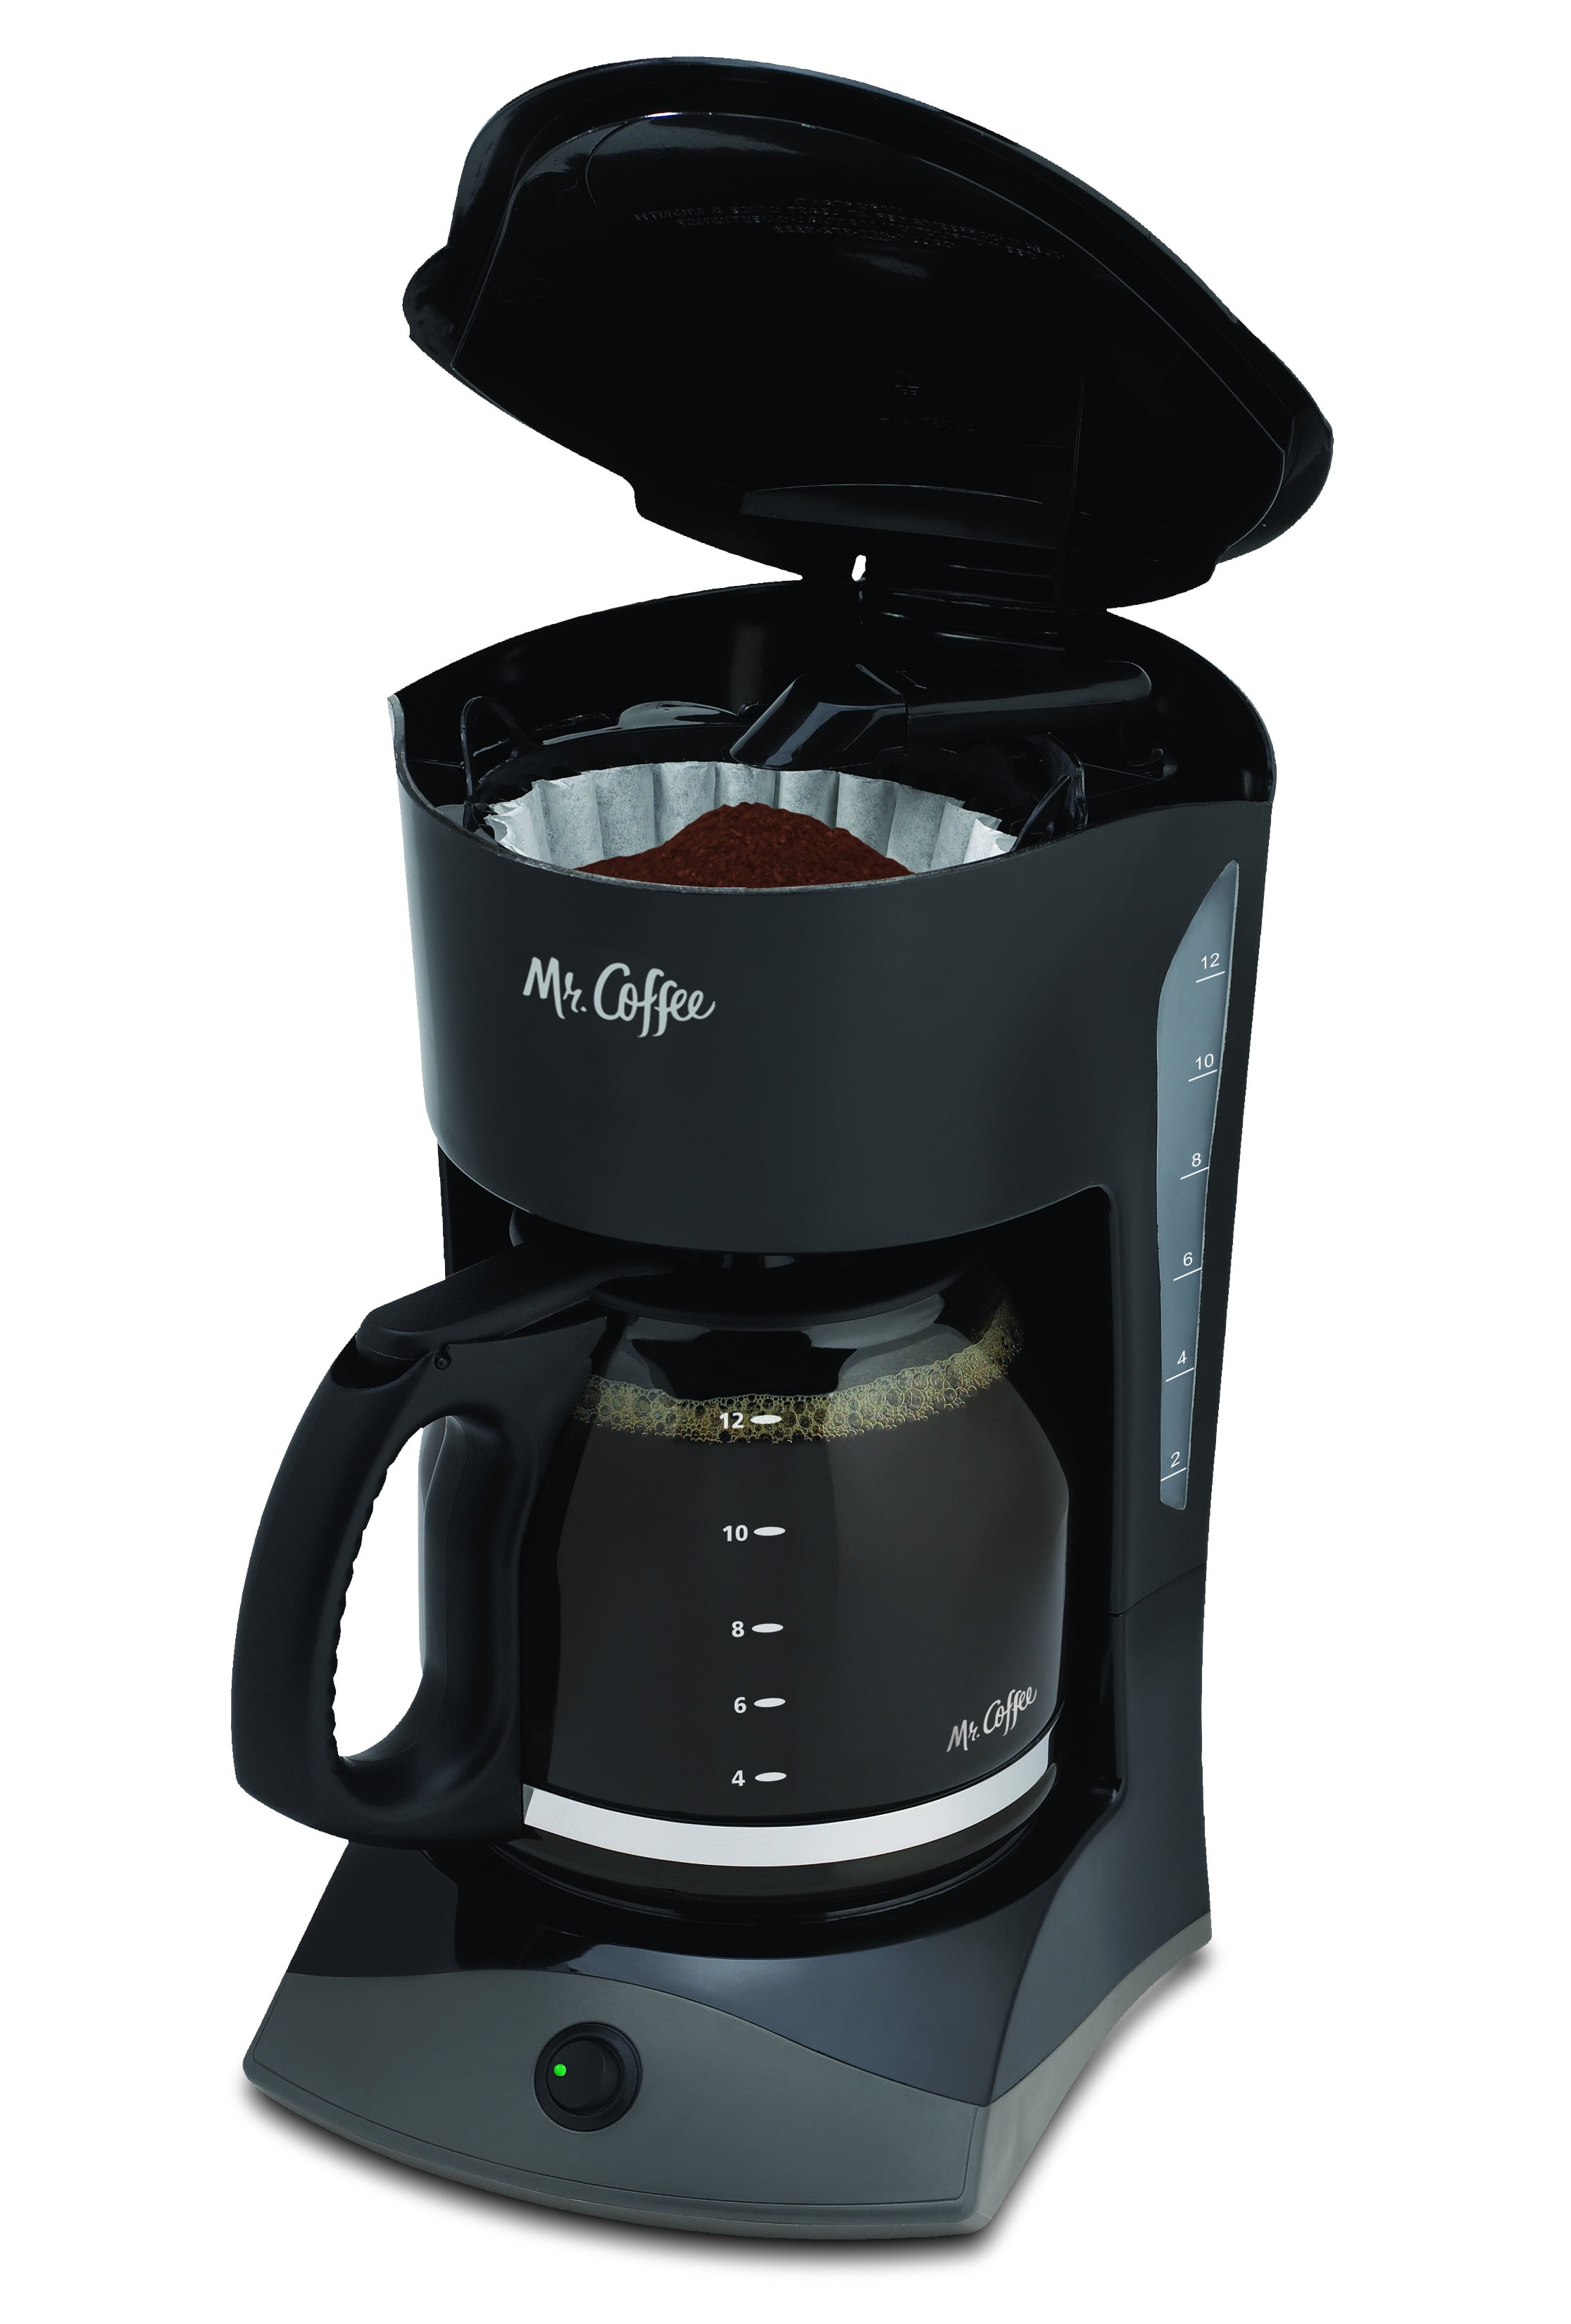 31160693 Mr. Coffee - Easy Measure 12-Cup Coffee Maker - Silver - Black  Friday